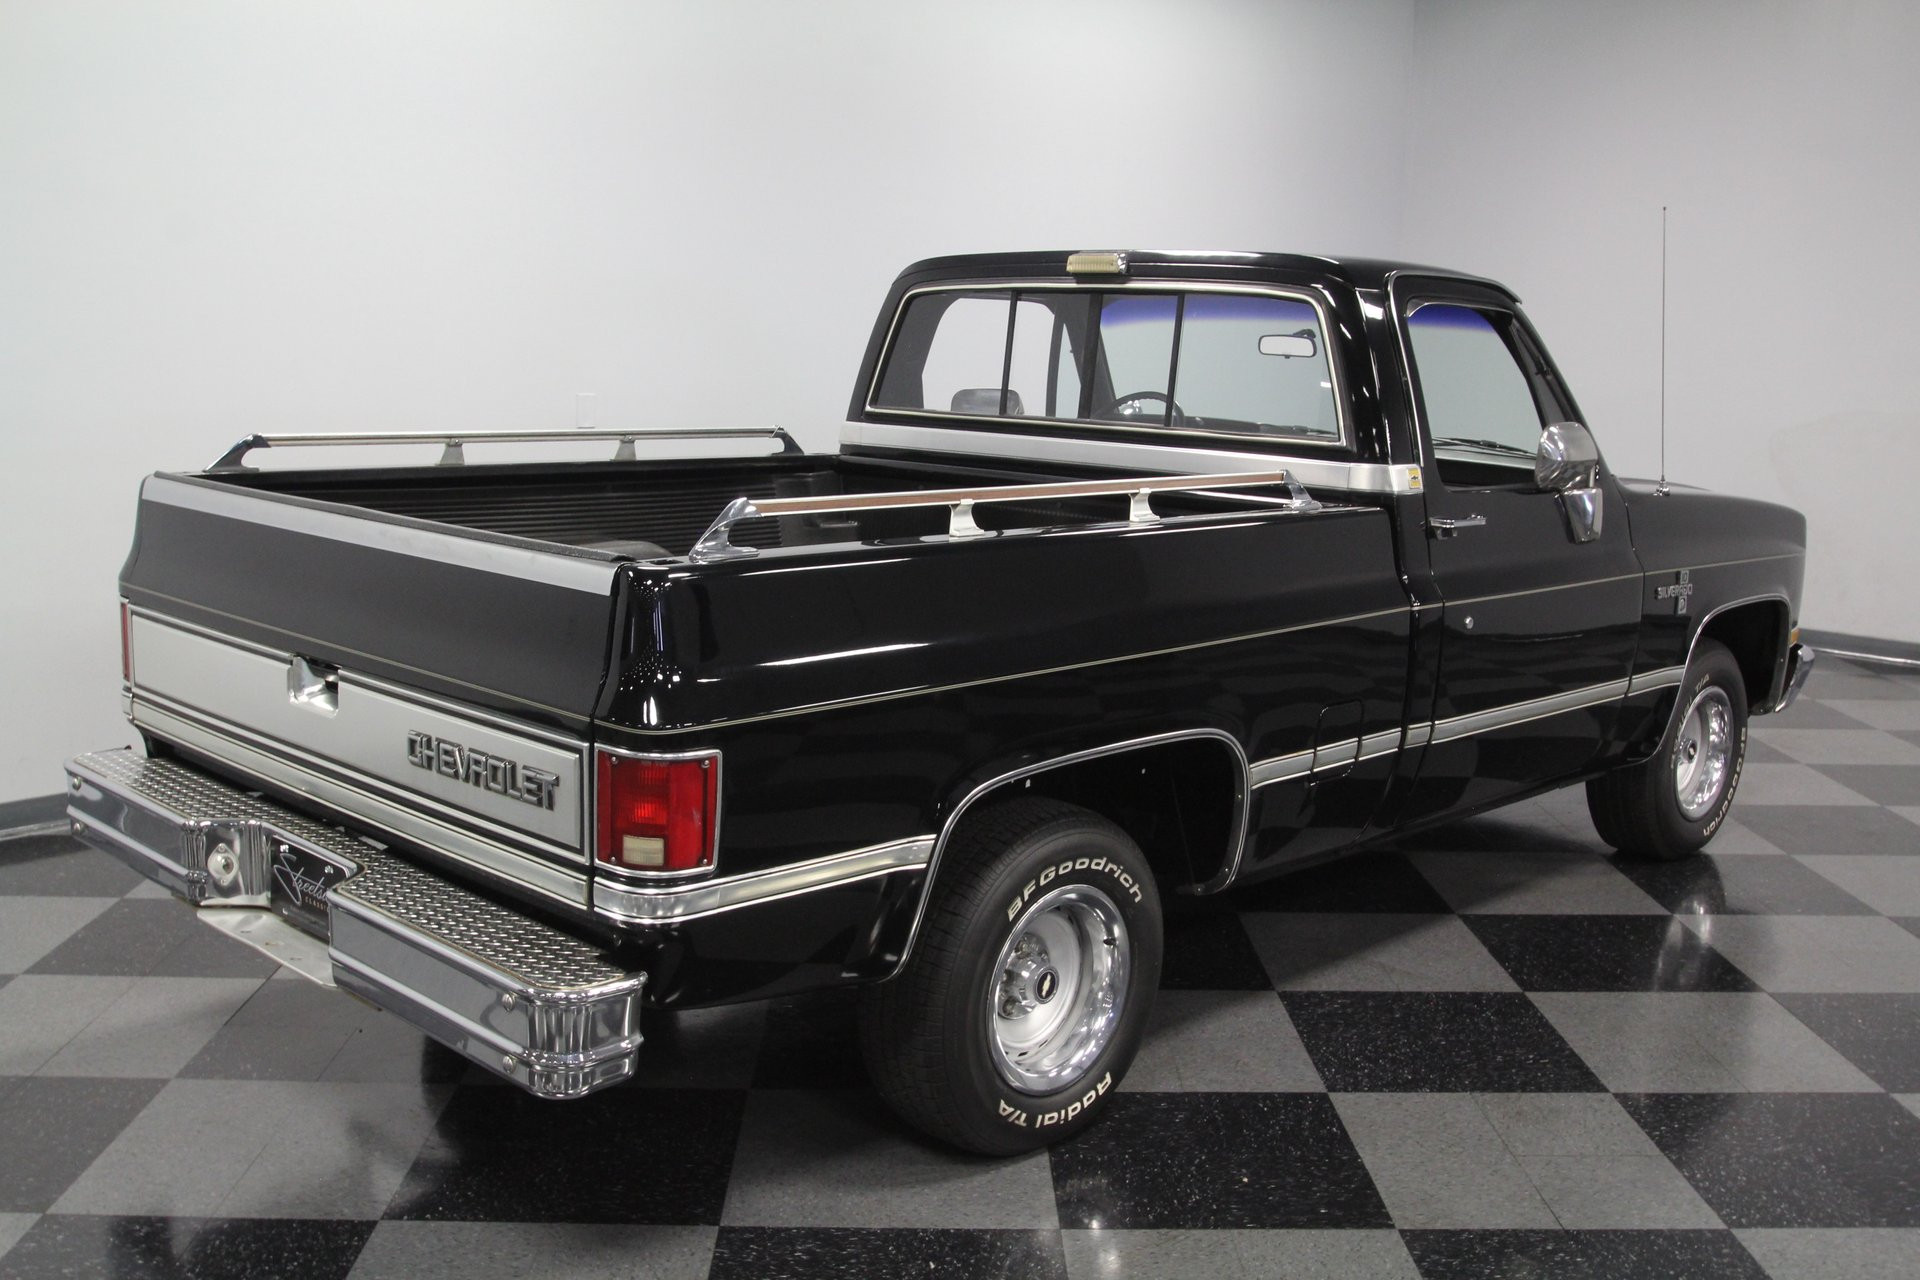 Show V Belt Routing On 1985 Chev C10 305 with Ac 1986 Chevrolet C10 Classic Cars for Sale – Streetside Classics Of Show V Belt Routing On 1985 Chev C10 305 with Ac